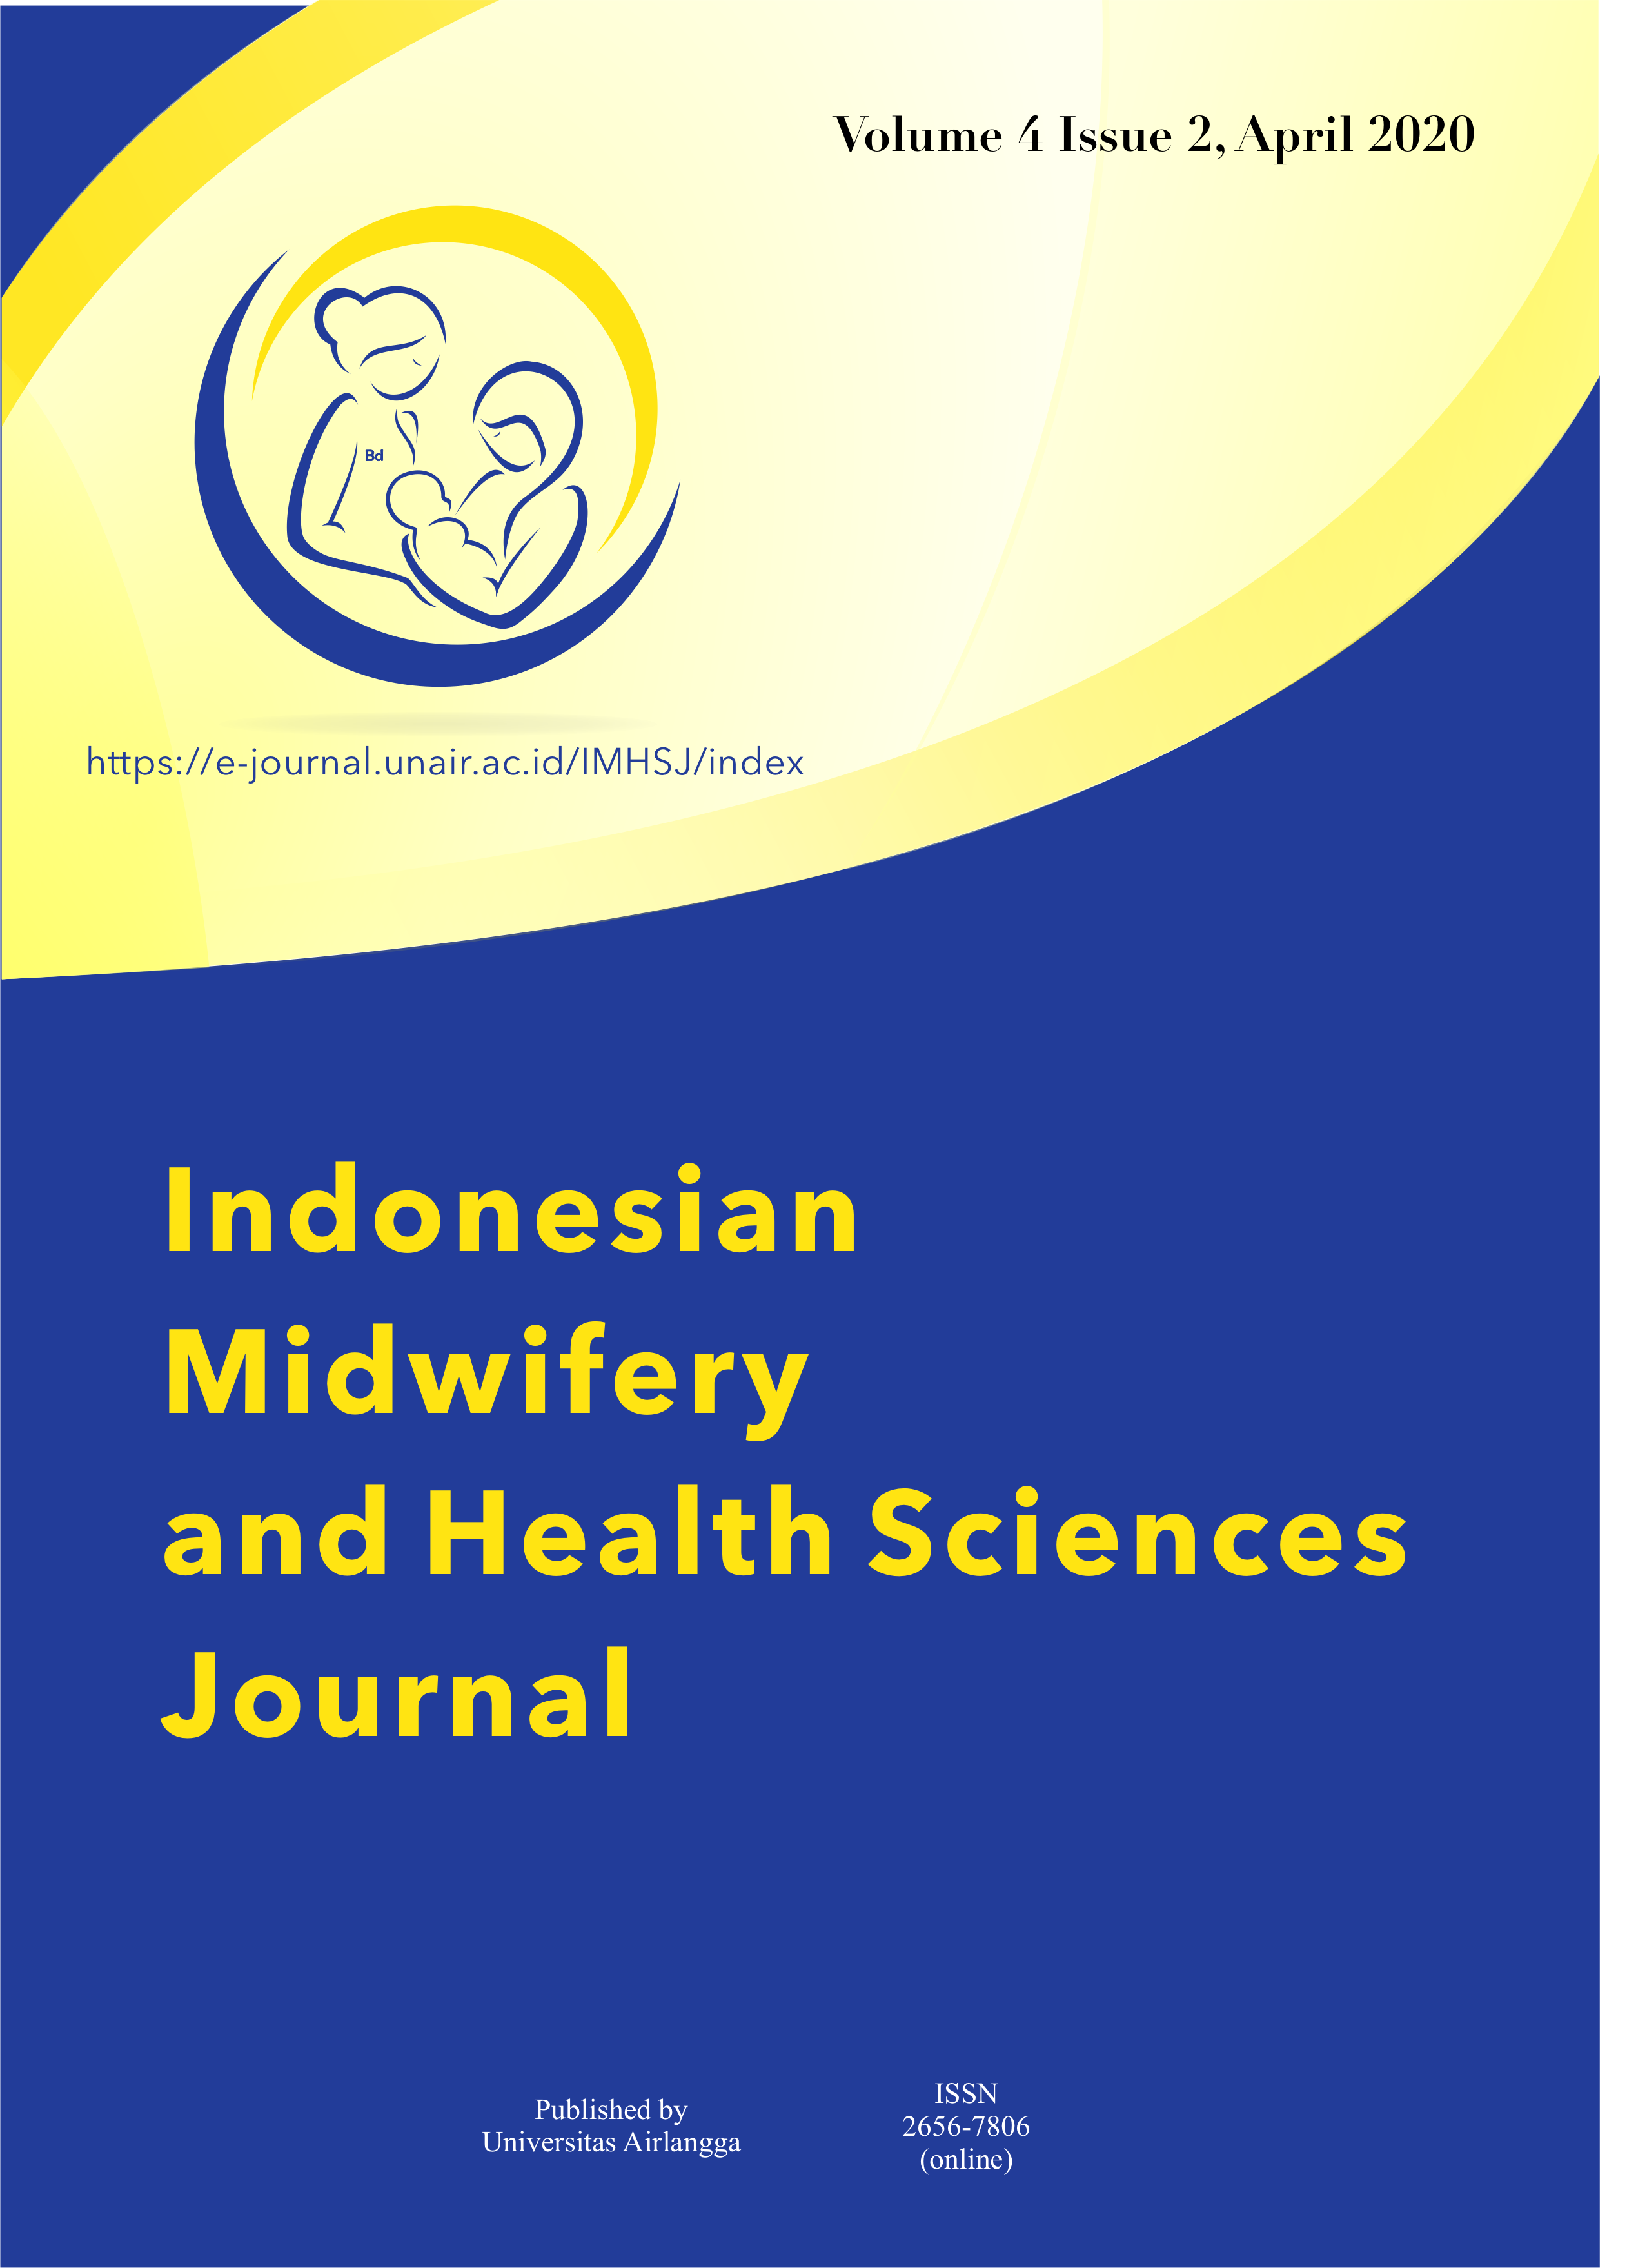 						View Vol. 4 No. 2 (2020): Indonesian Midwifery and Health Sciences Journal, April 2020
					